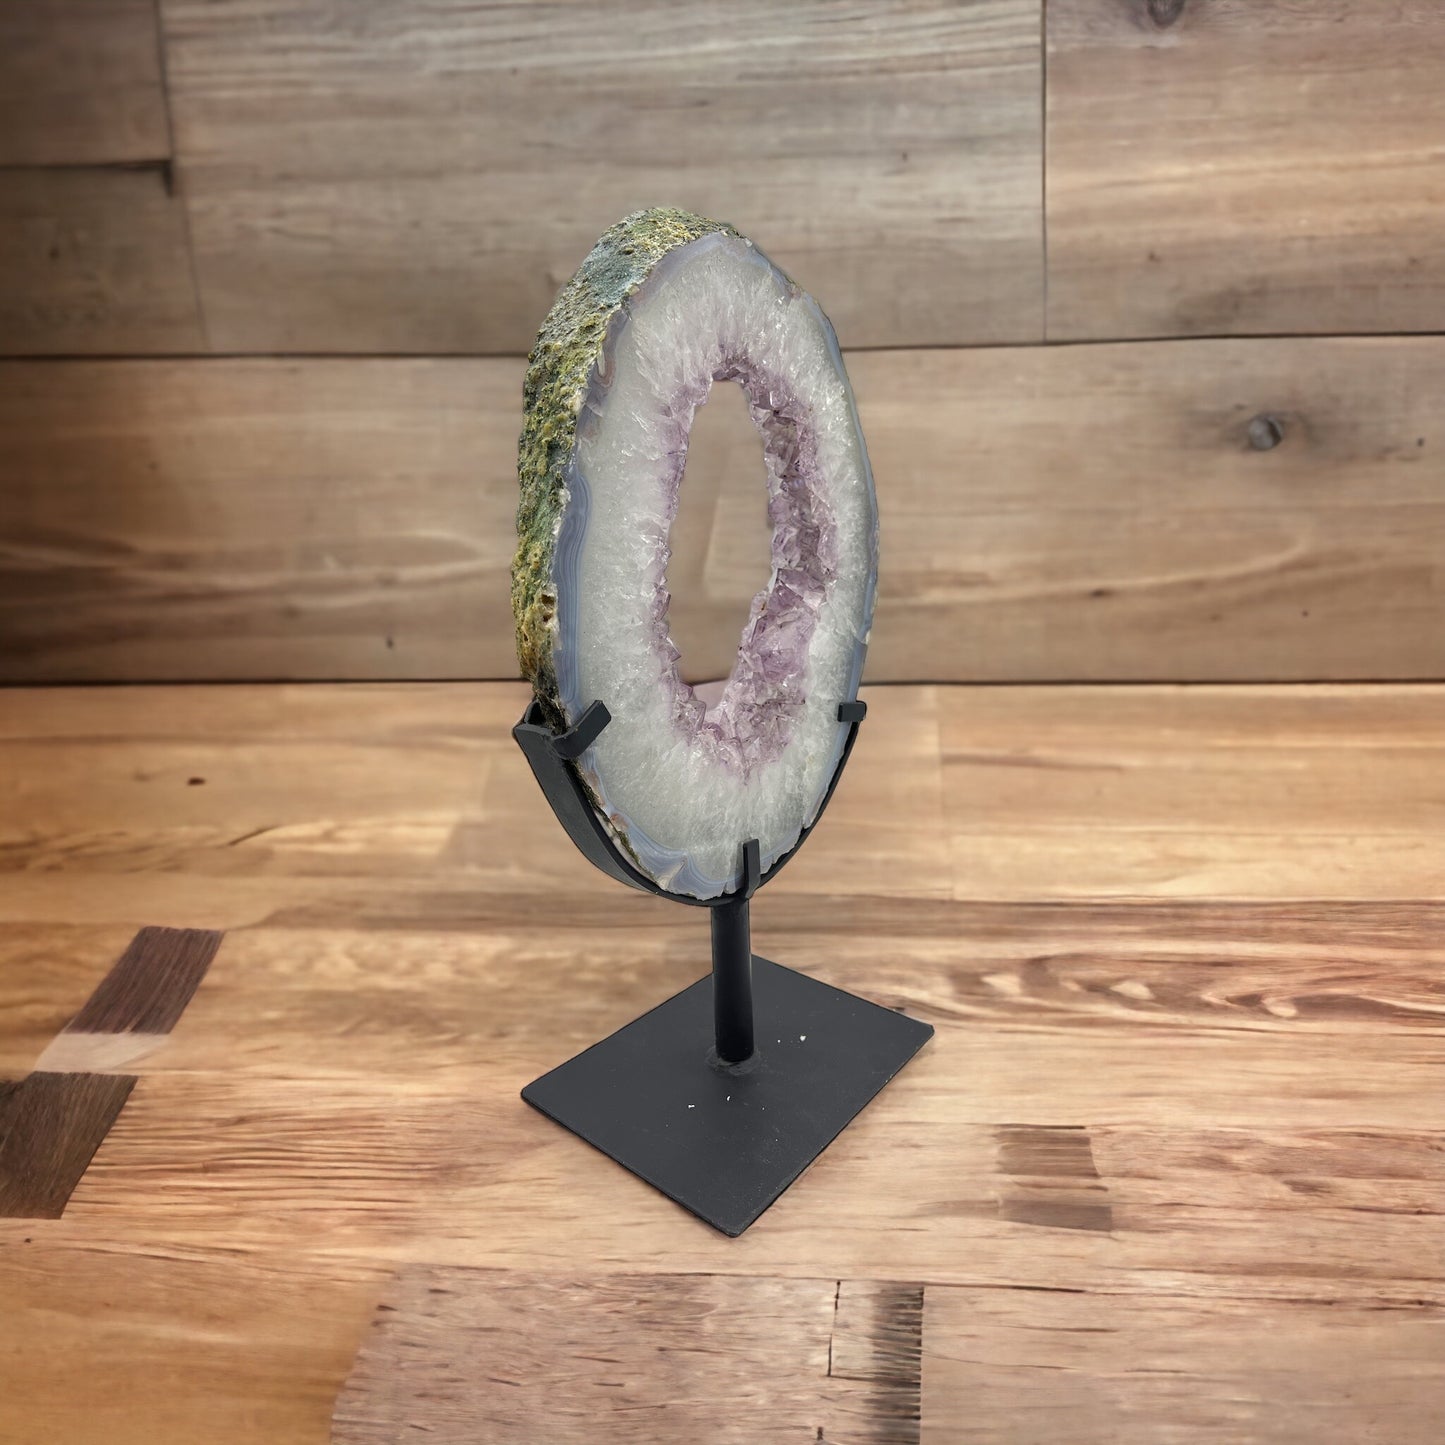 Amethyst on stand #13